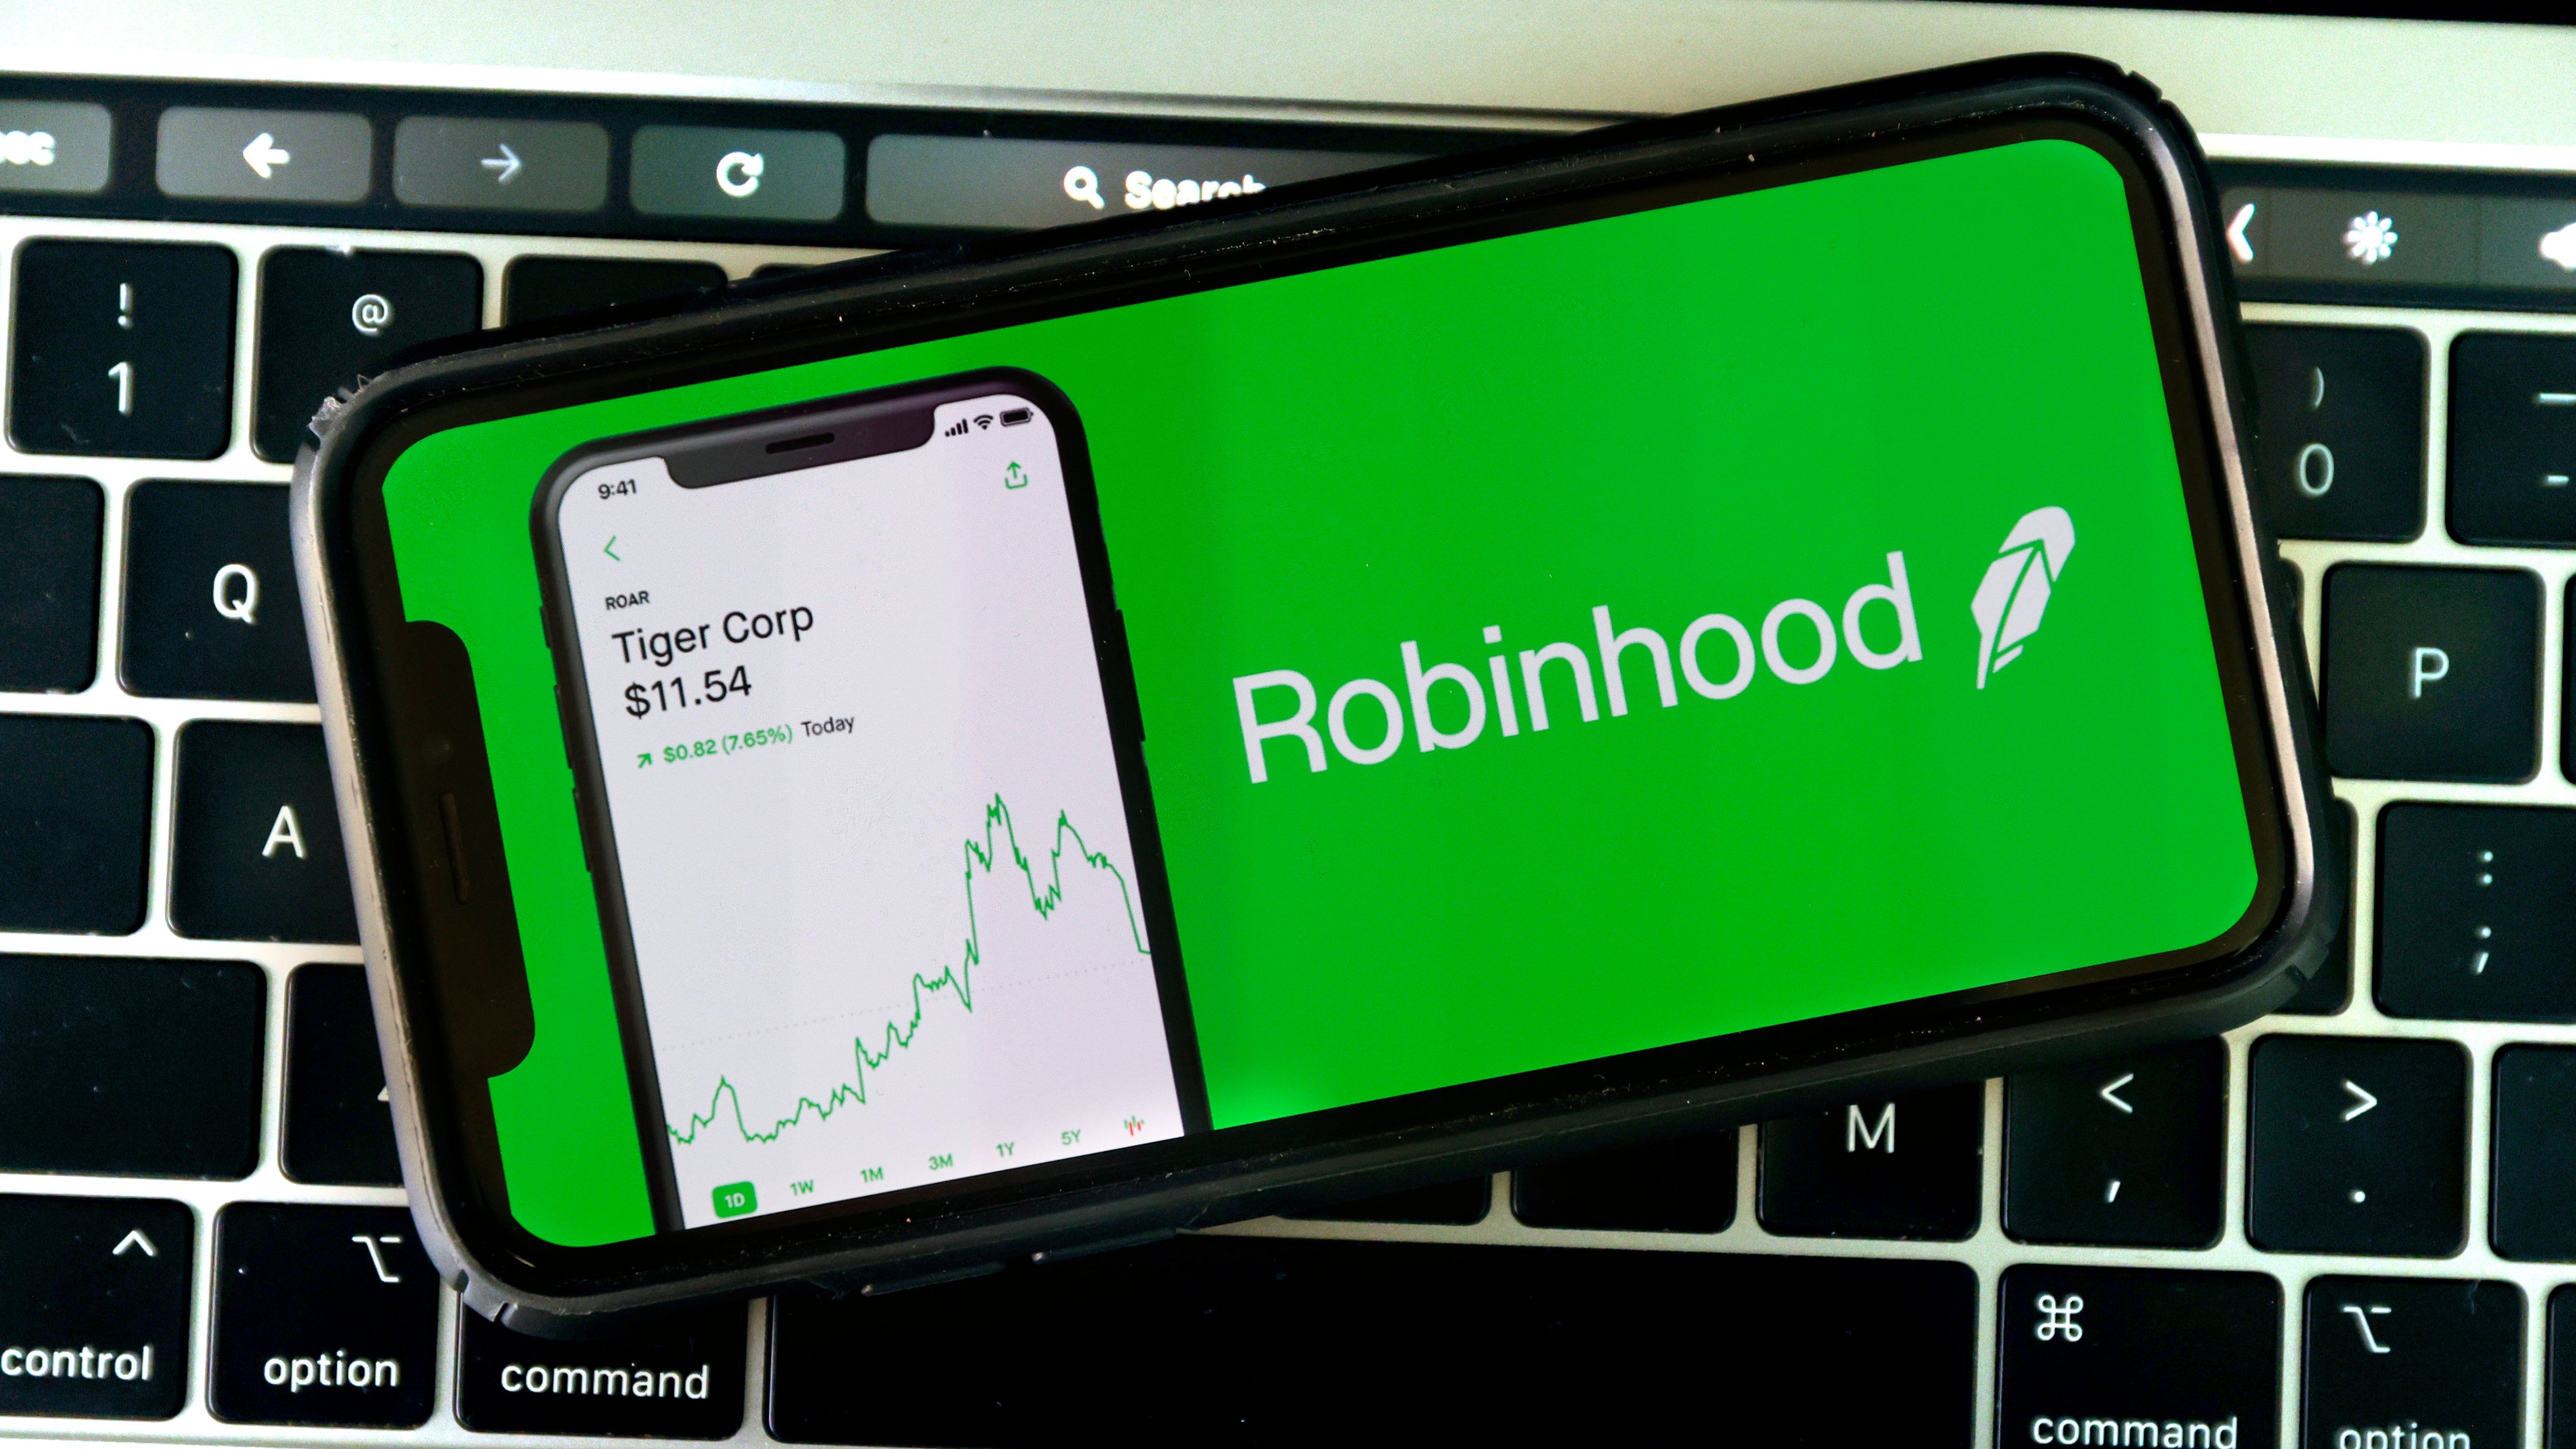 Robinhood's Era of Fun and Meme Stock Games Comes to an End